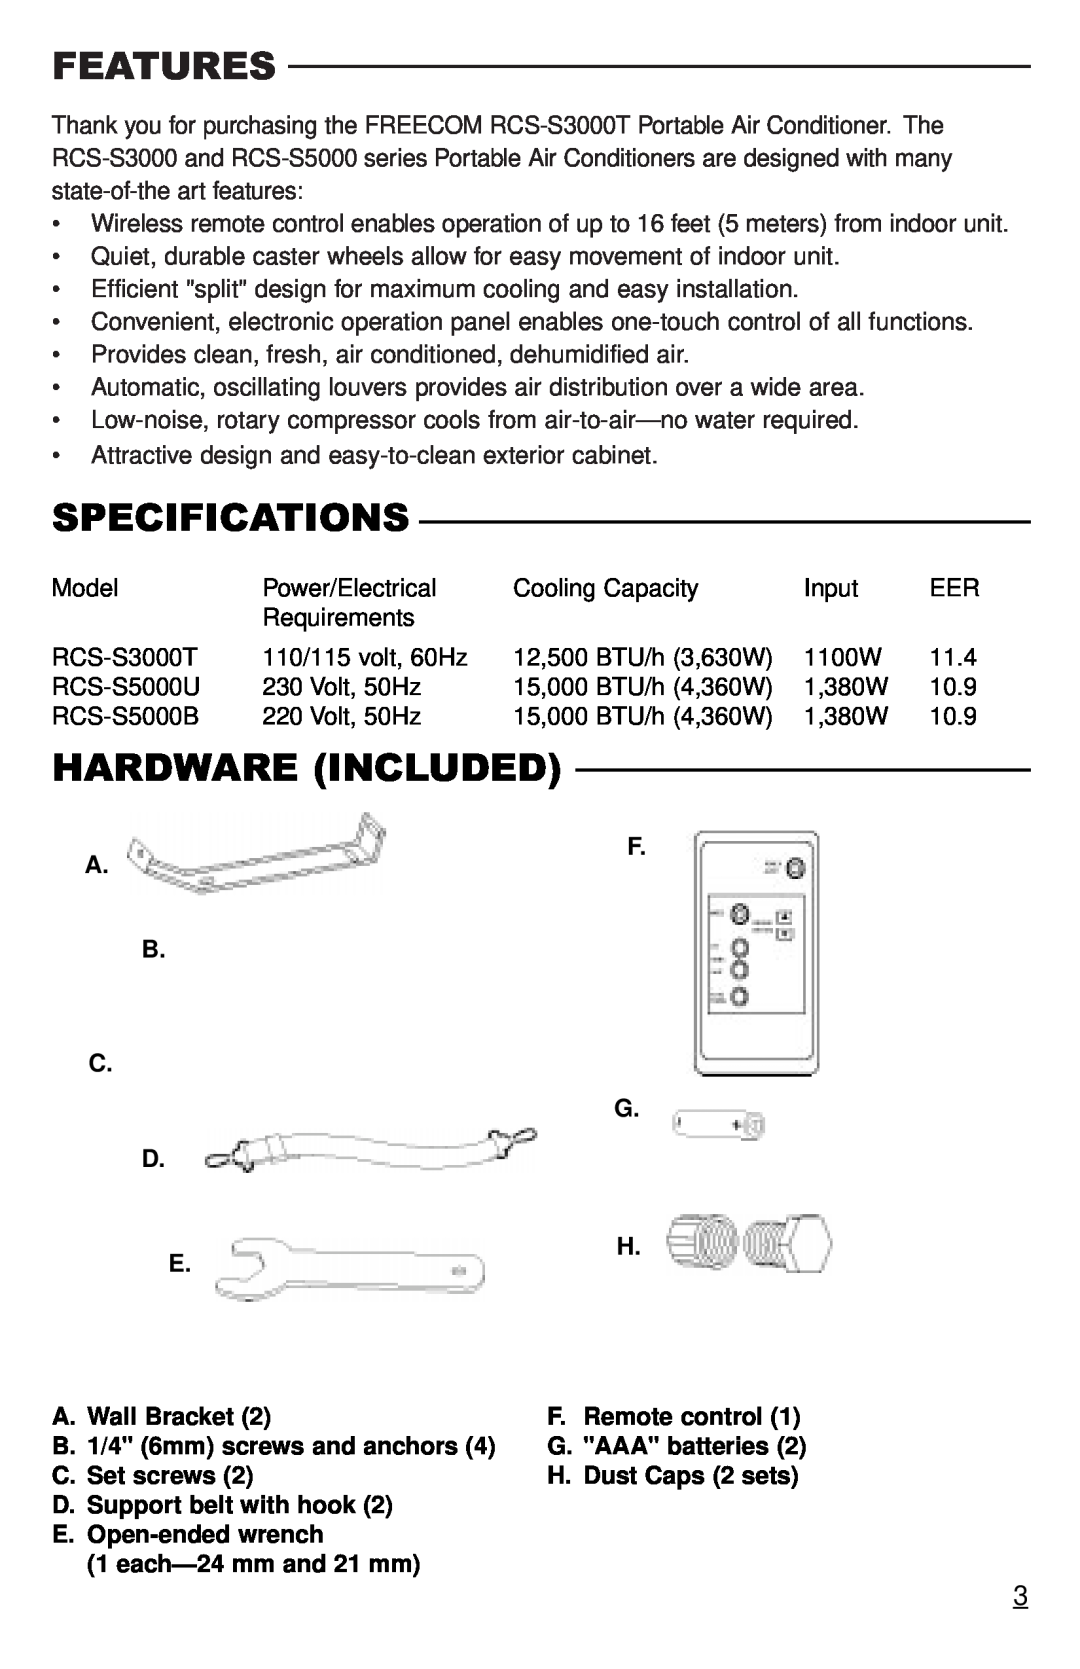 Freecom Technologies RCS-S3000T, RCS-S5000U, RCS-S5000B operation manual Features, Specifications, Hardware Included 